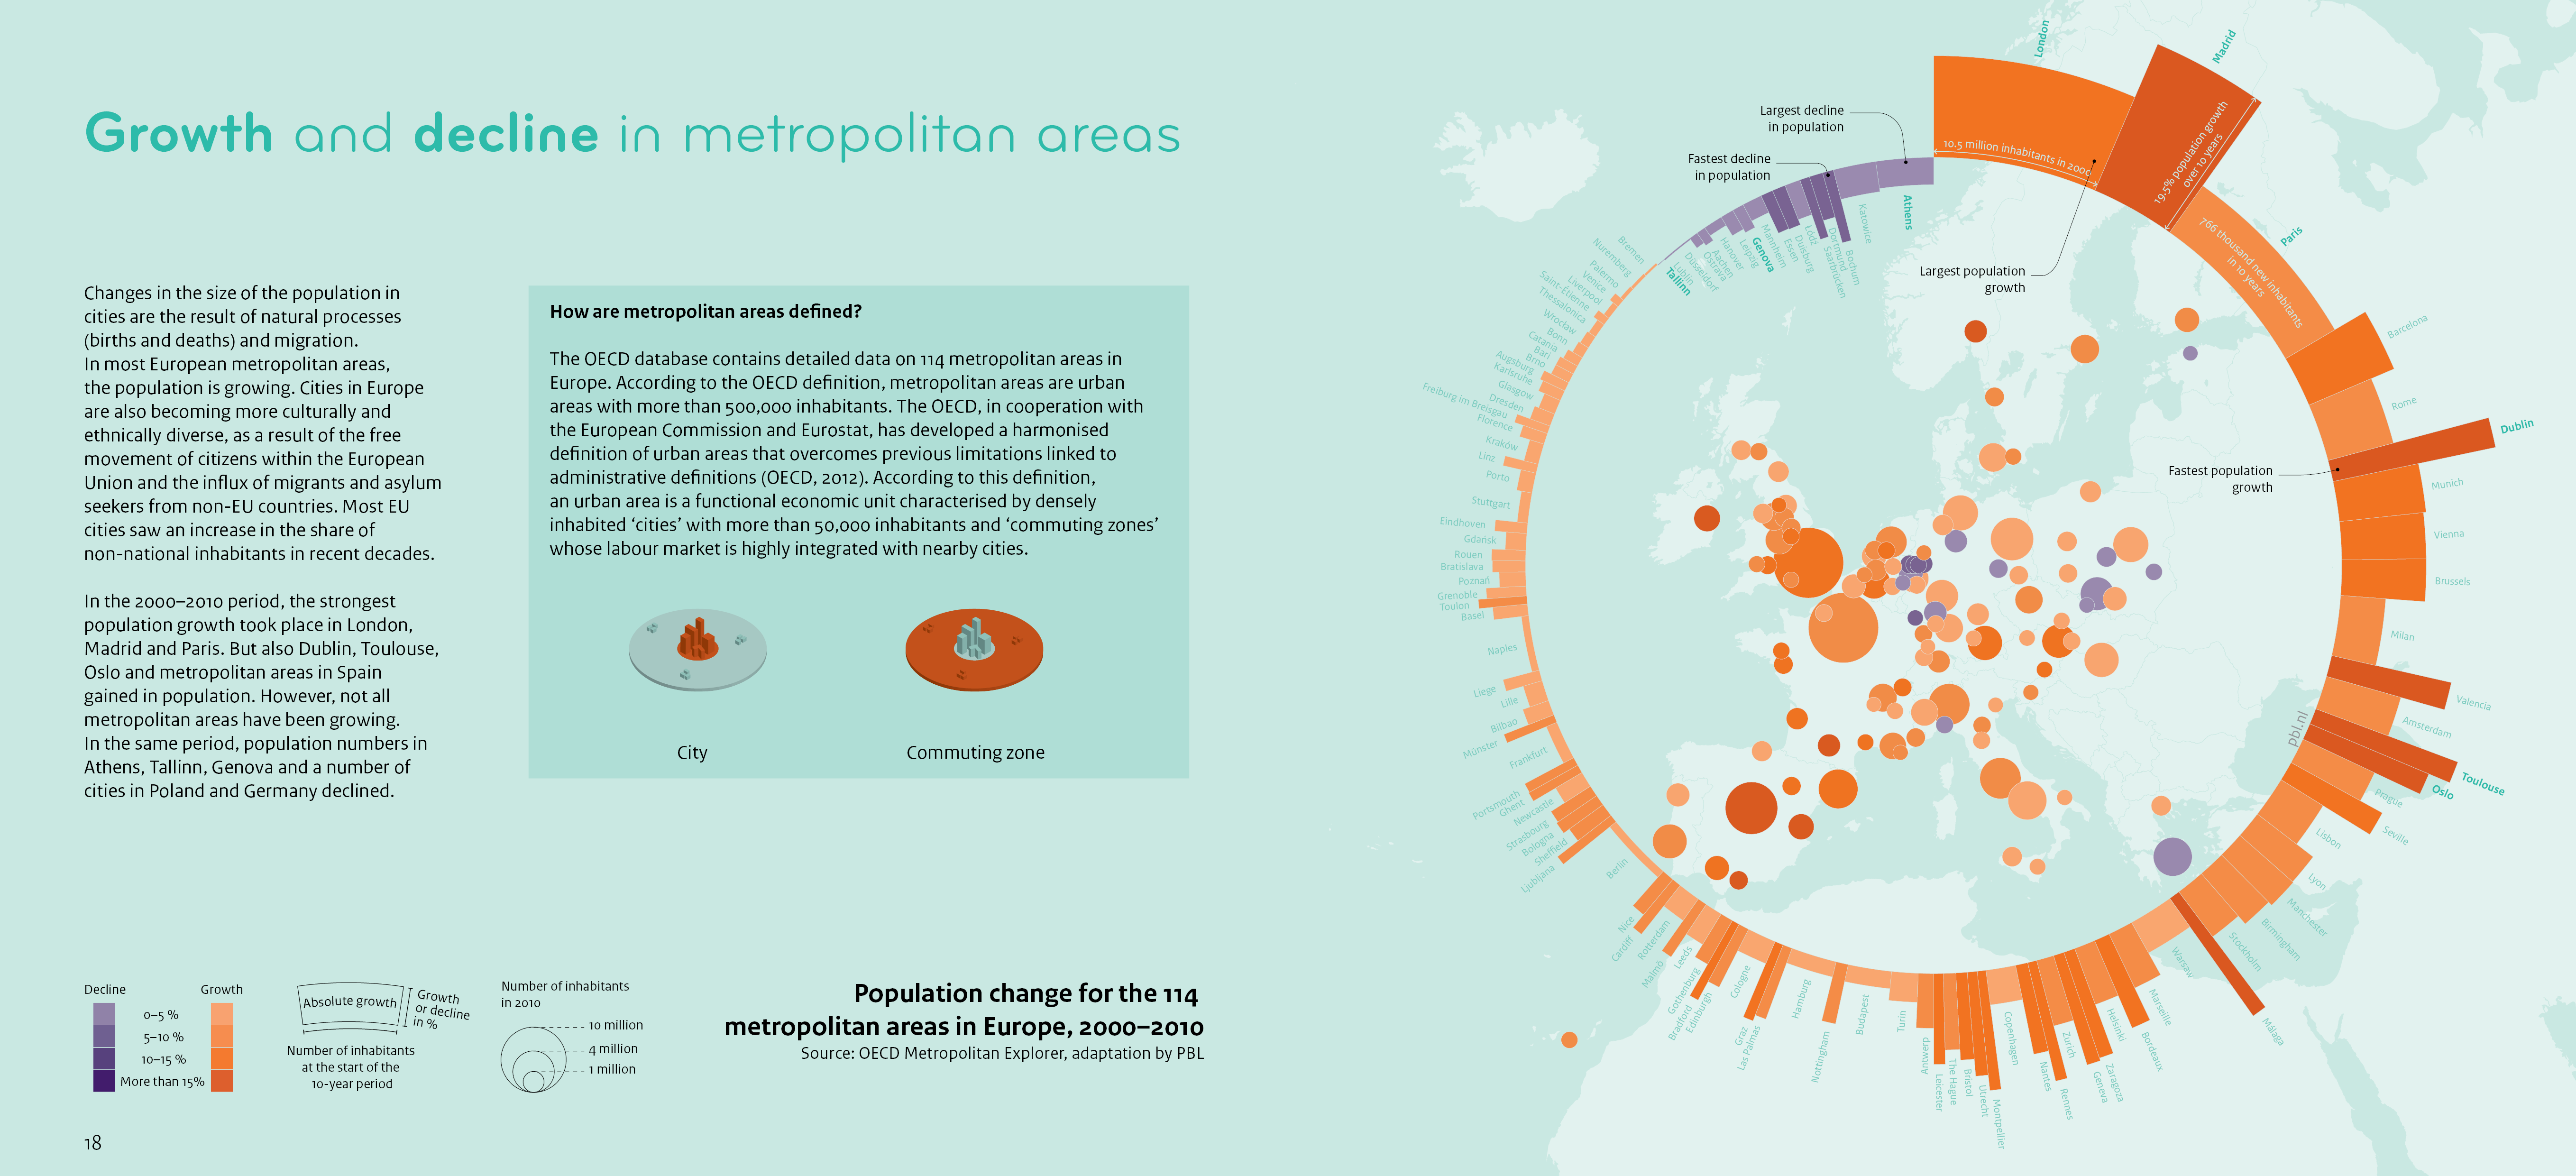 This infographic shows population change in the 2000–2010 period for 114 metropolitan areas in Europe.